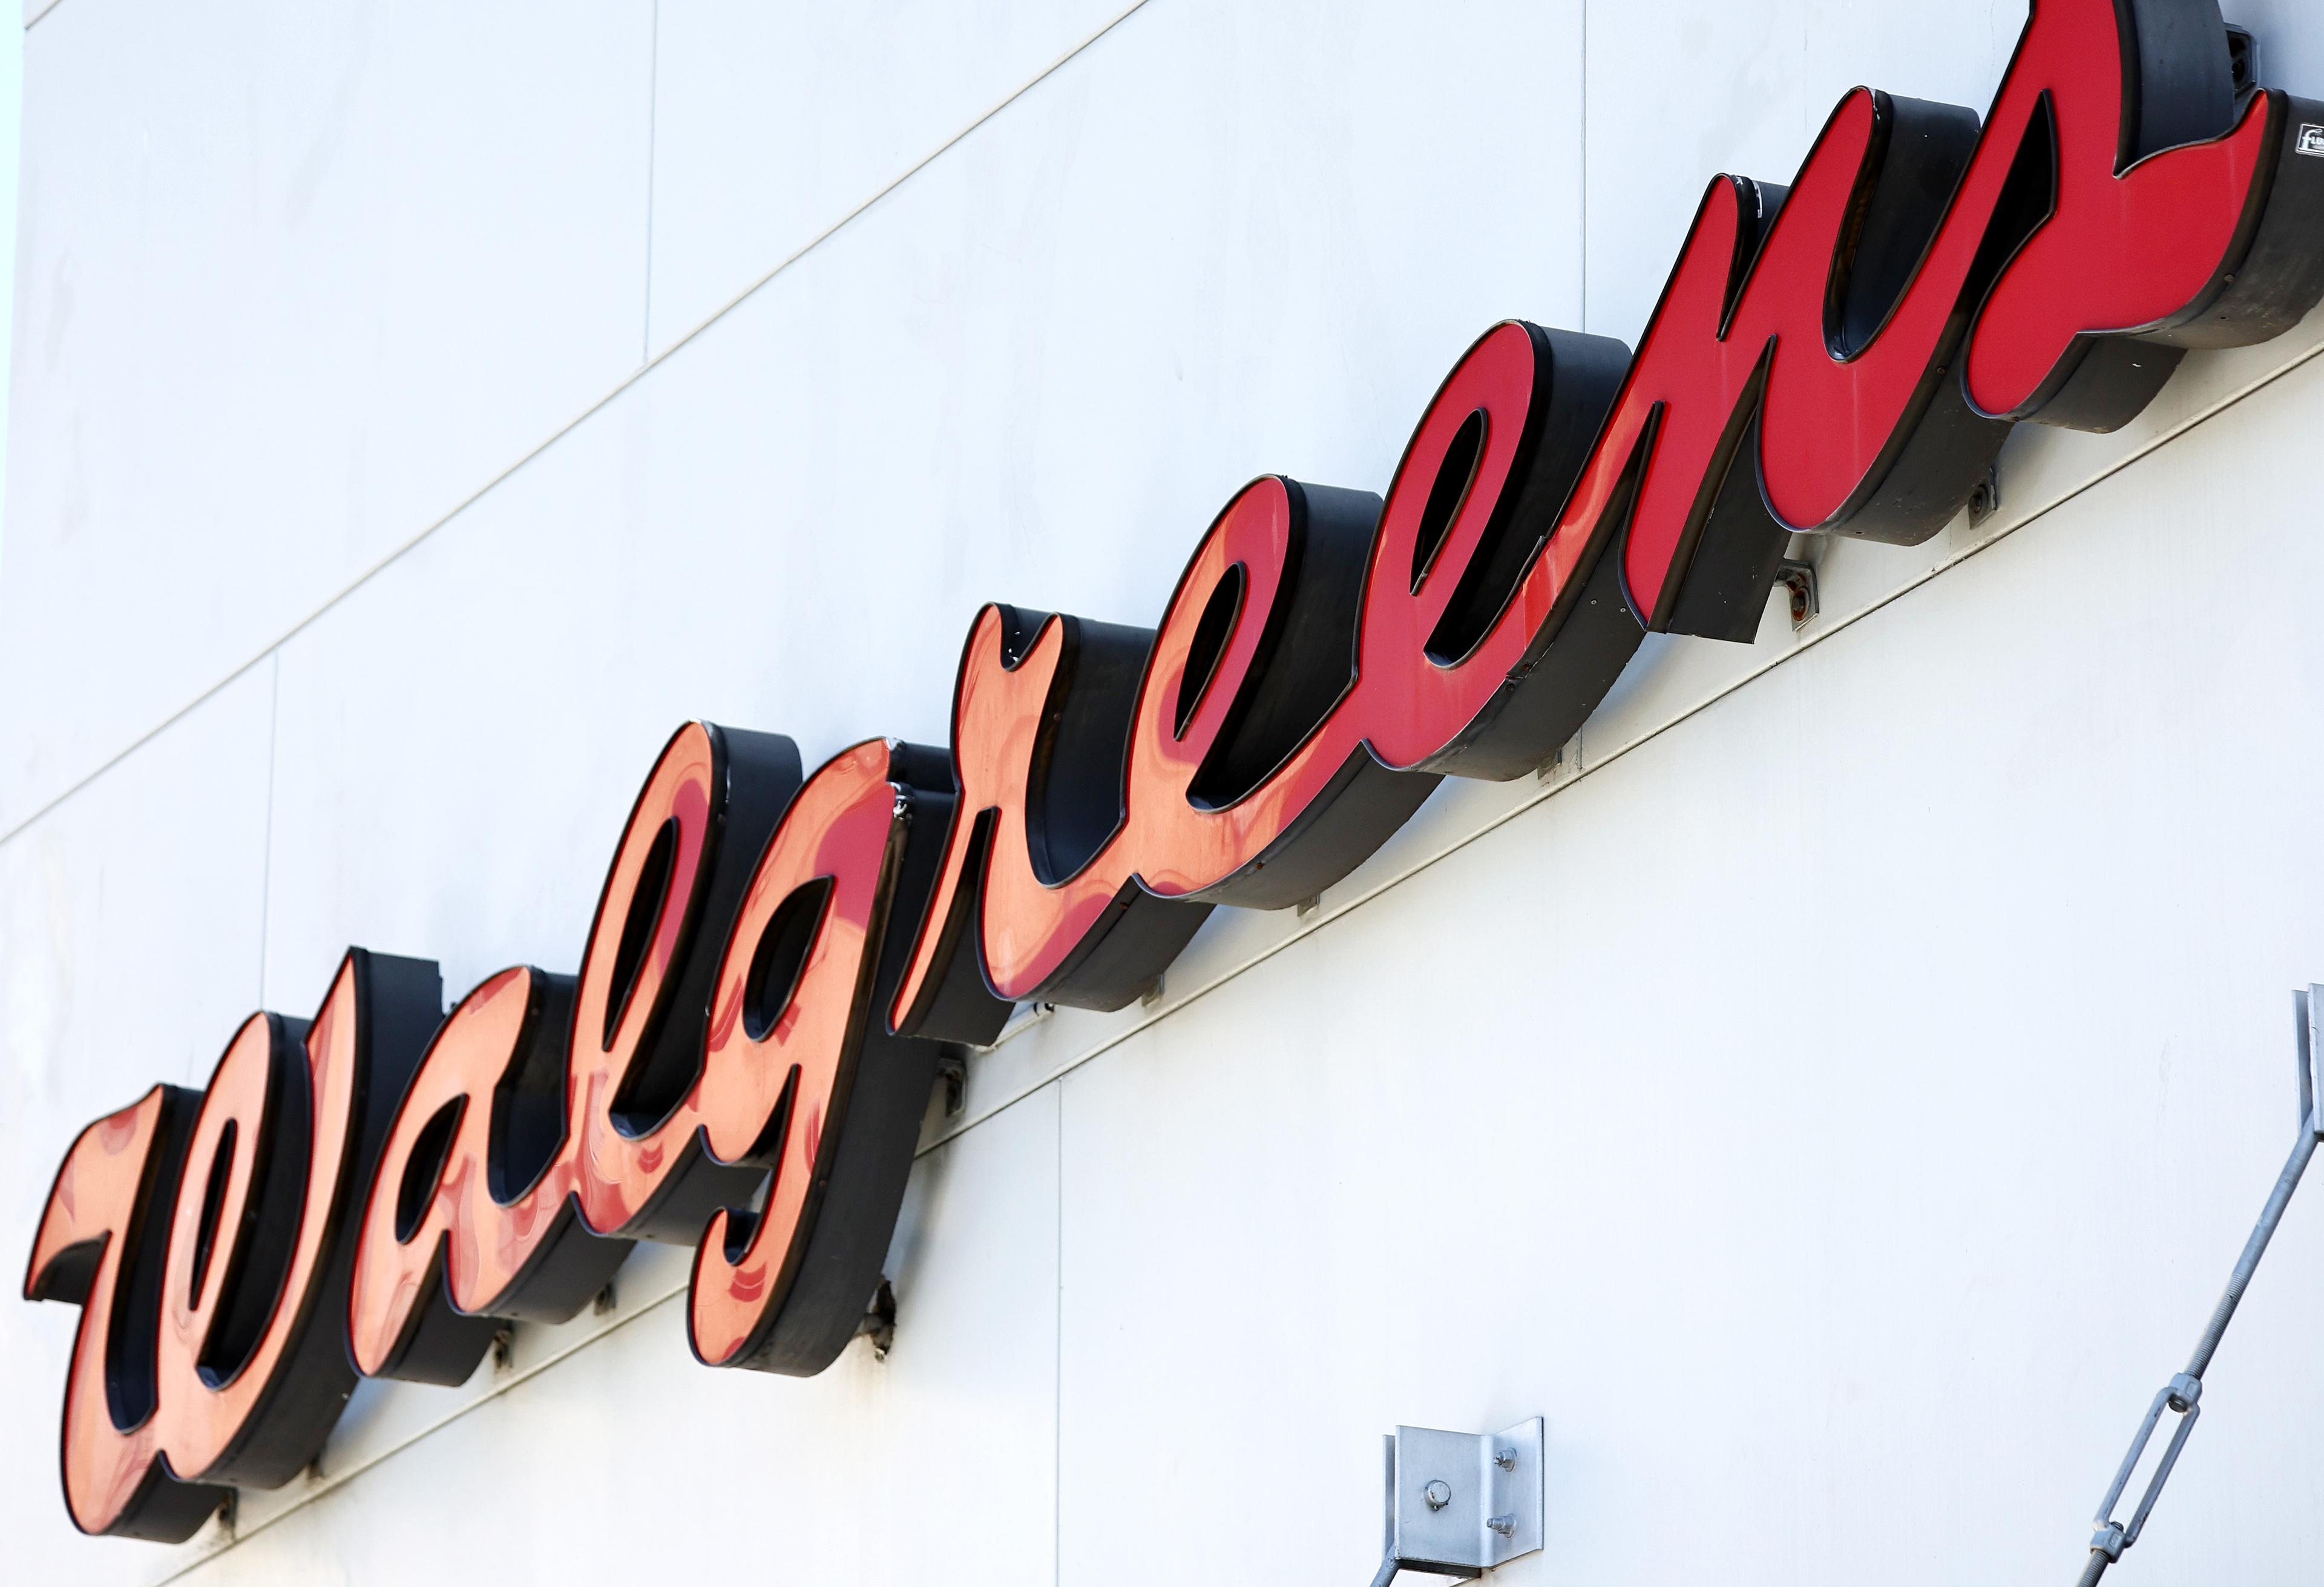 Walgreens Manager Says She Was Fired for Calling Police on Alleged Shoplifter